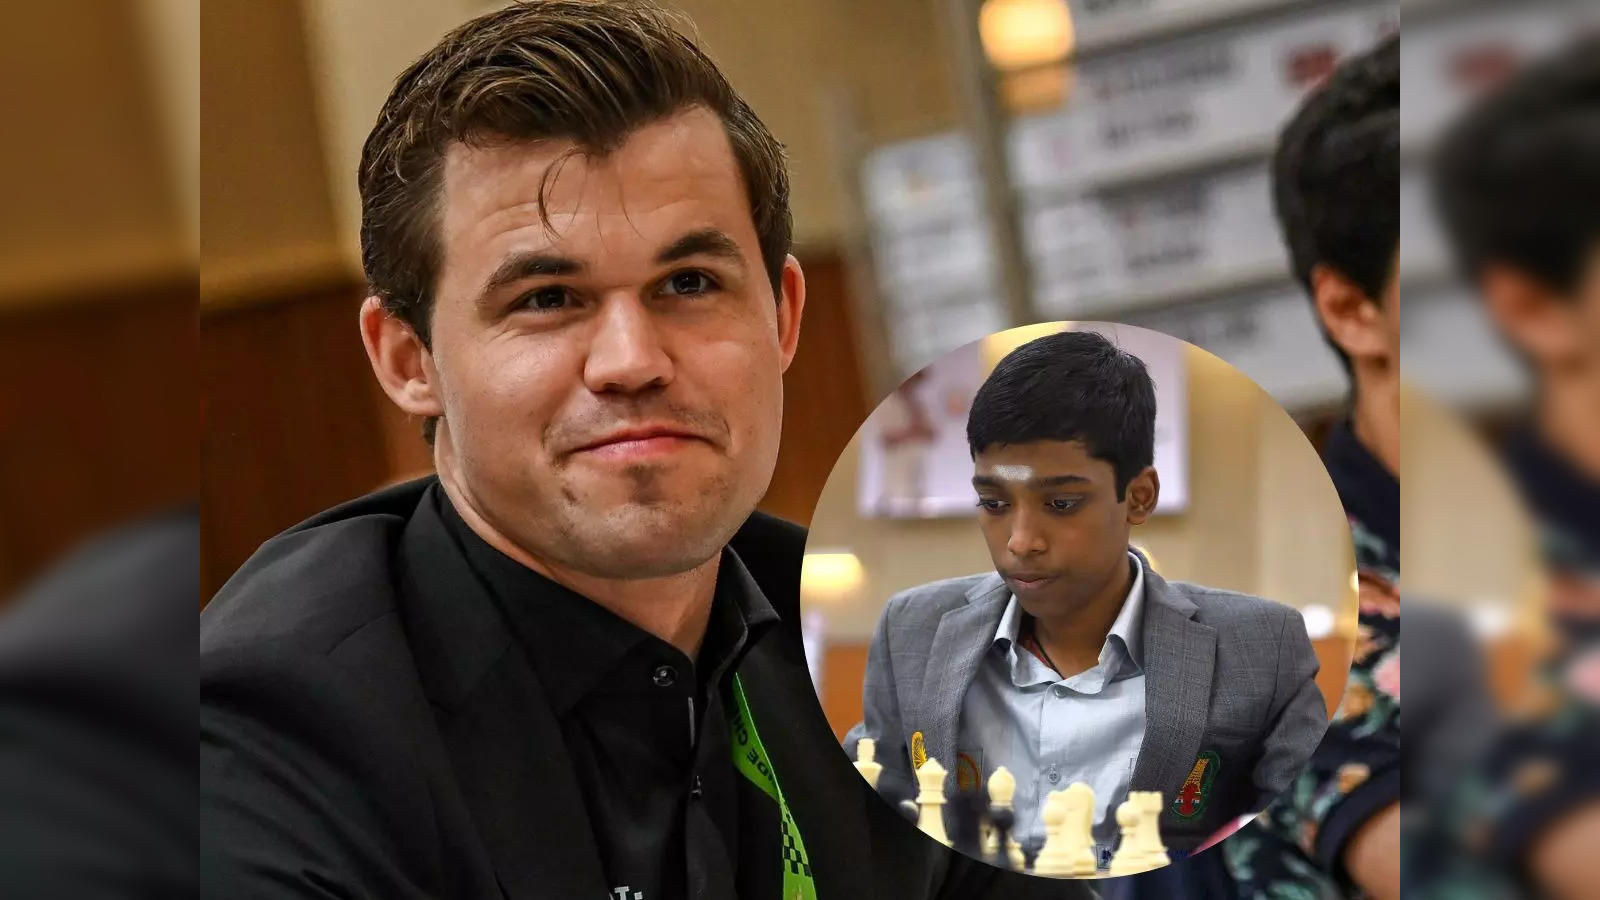 Ratings are no longer a priority; focussed on growing the sport, says Magnus  Carlsen - The Economic Times